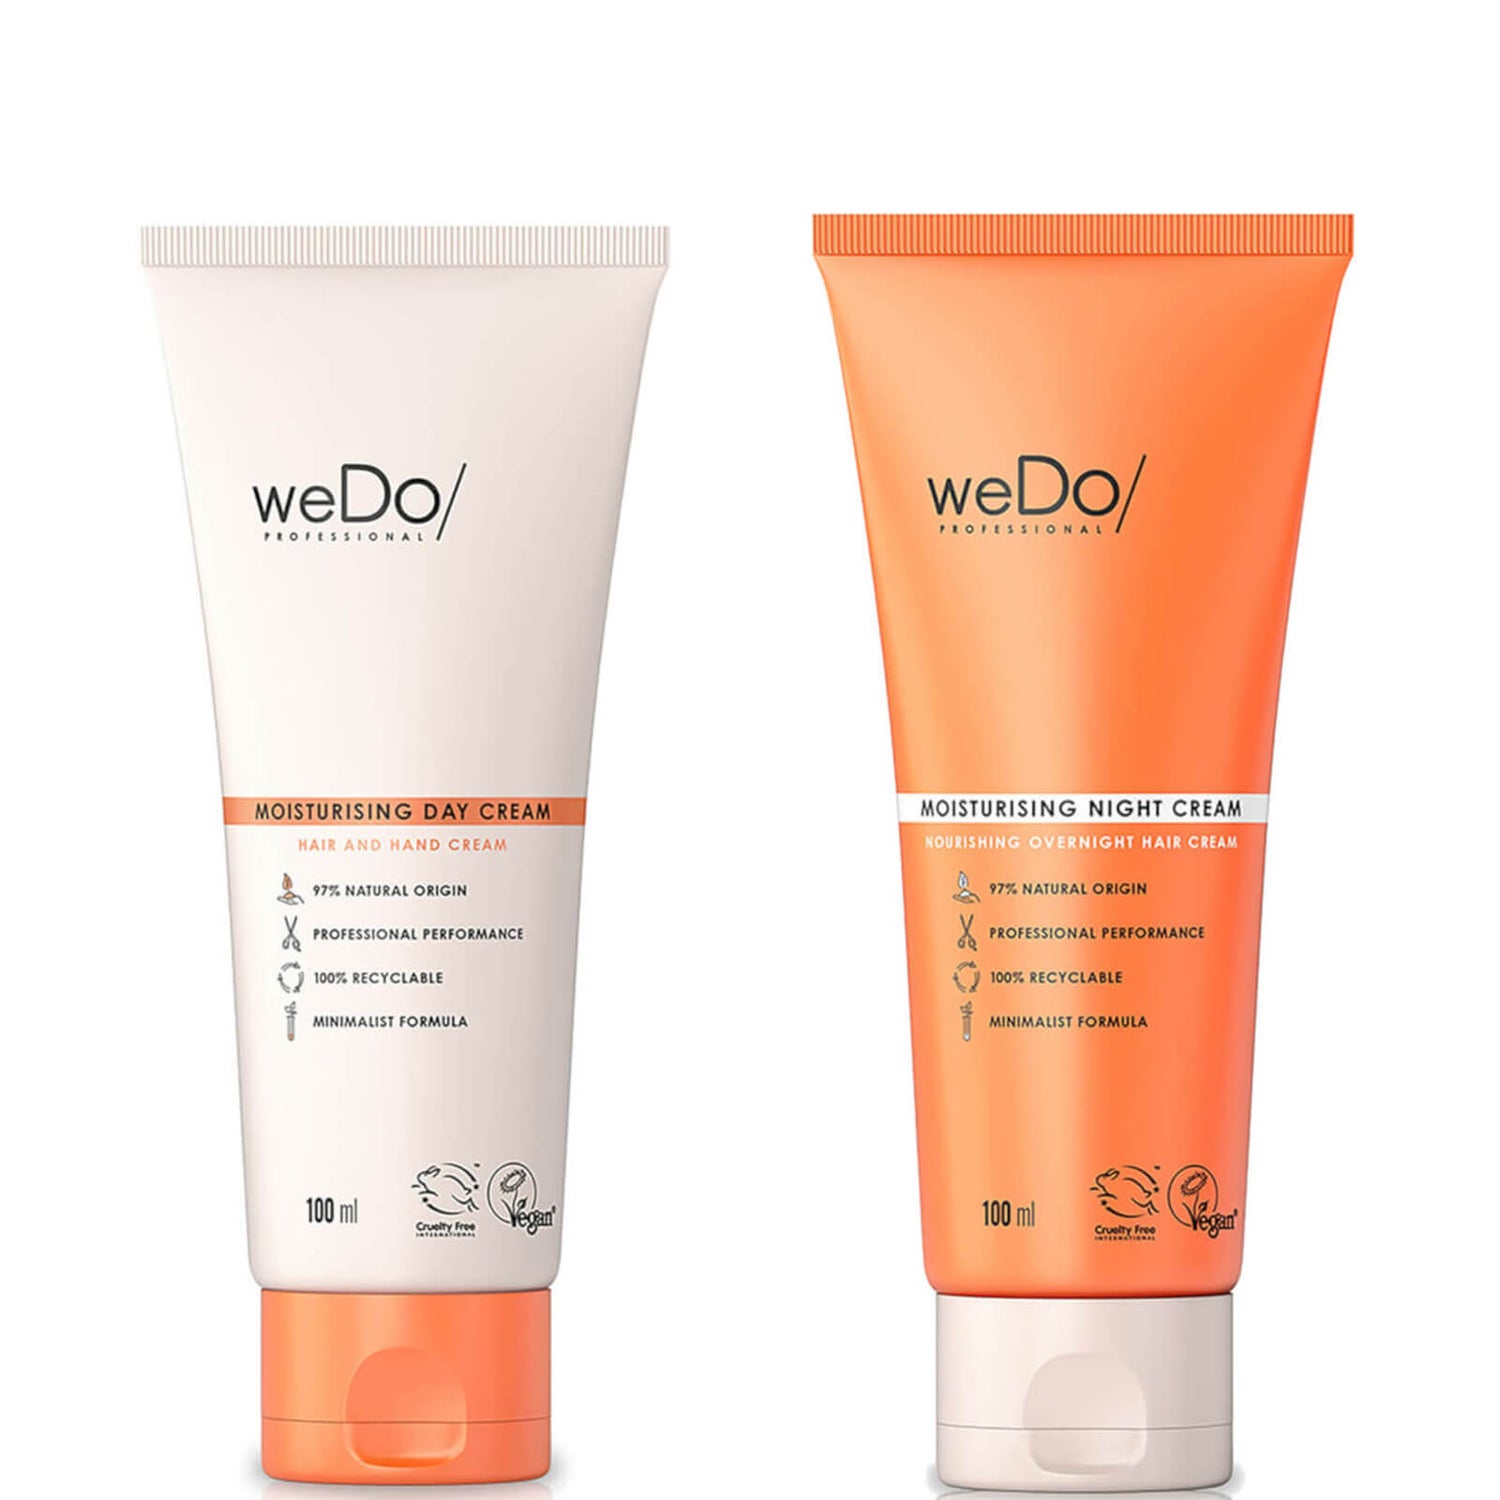 weDo/ Professional Leave-in Treatment Duo